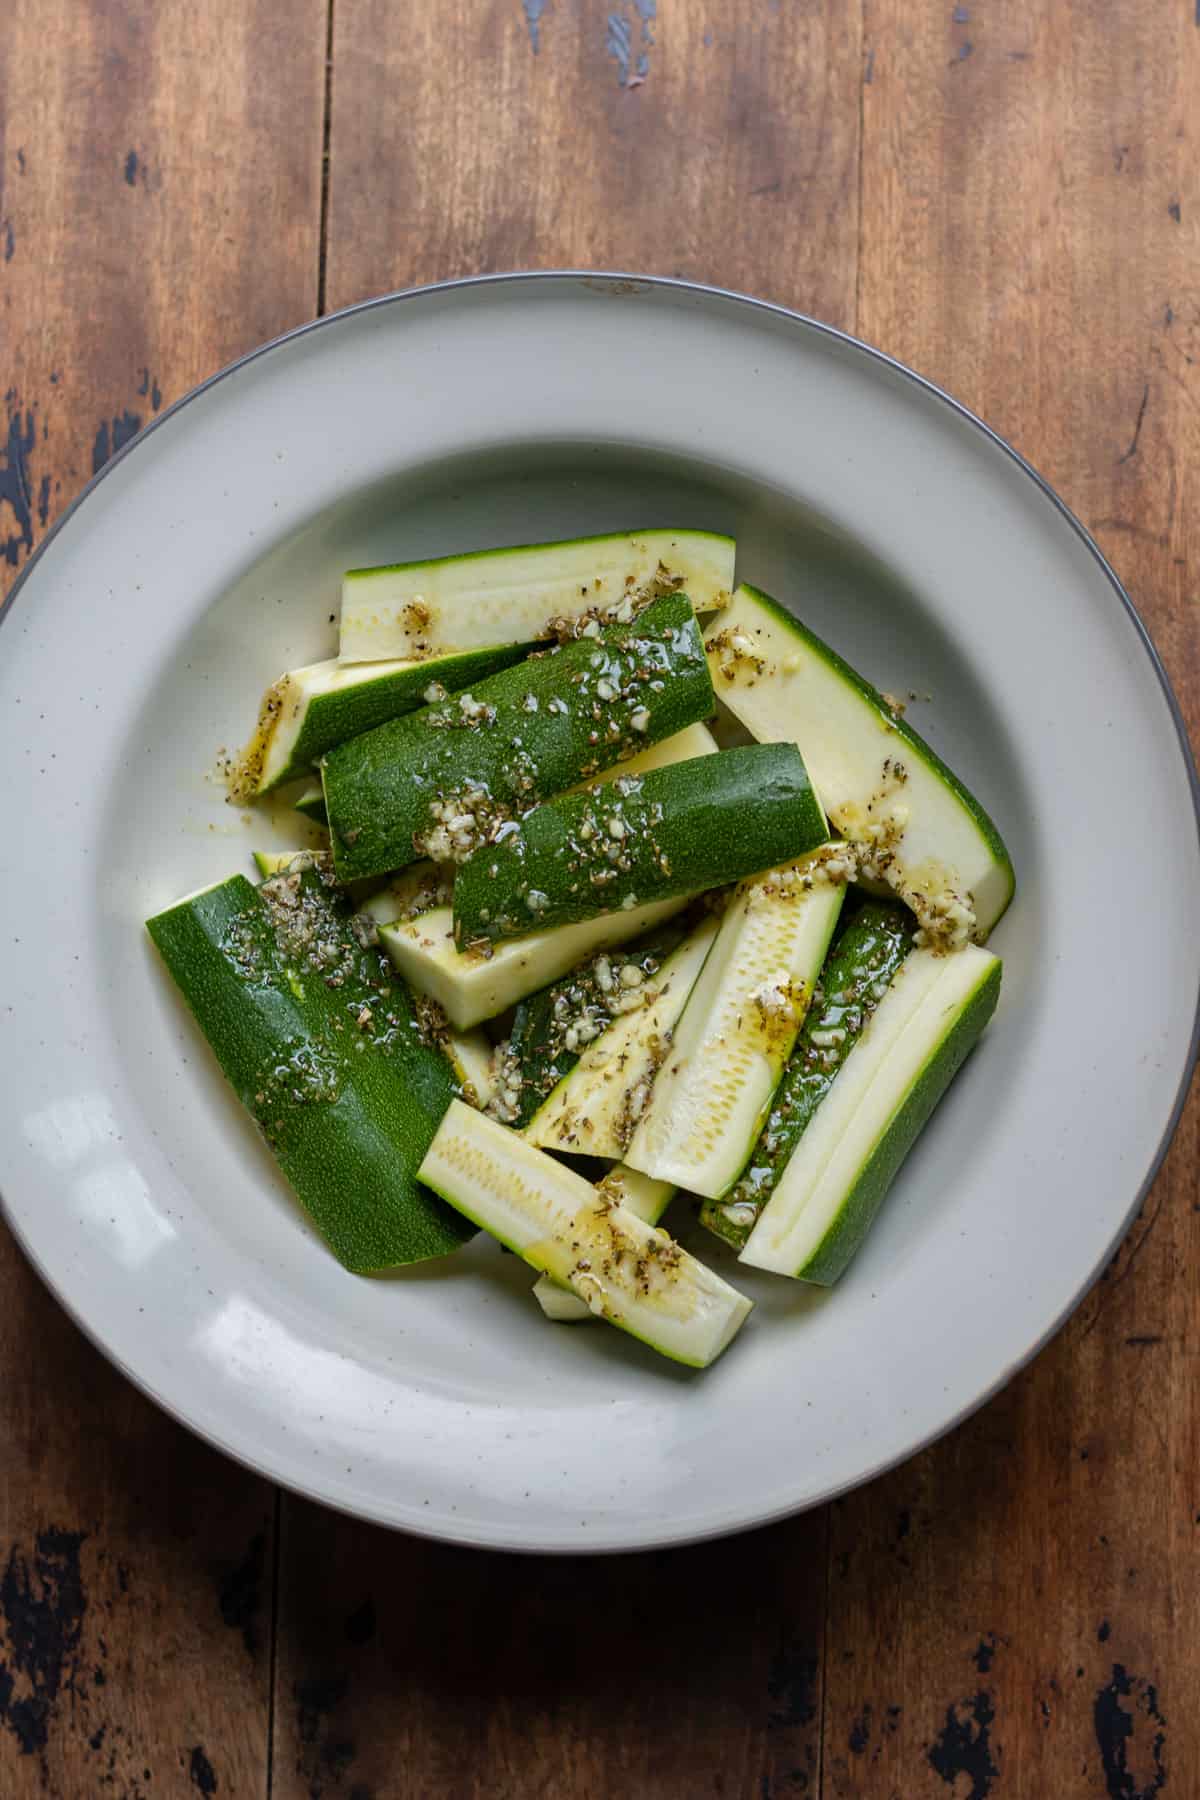 Spears of zucchini in a bowl with seasoning.